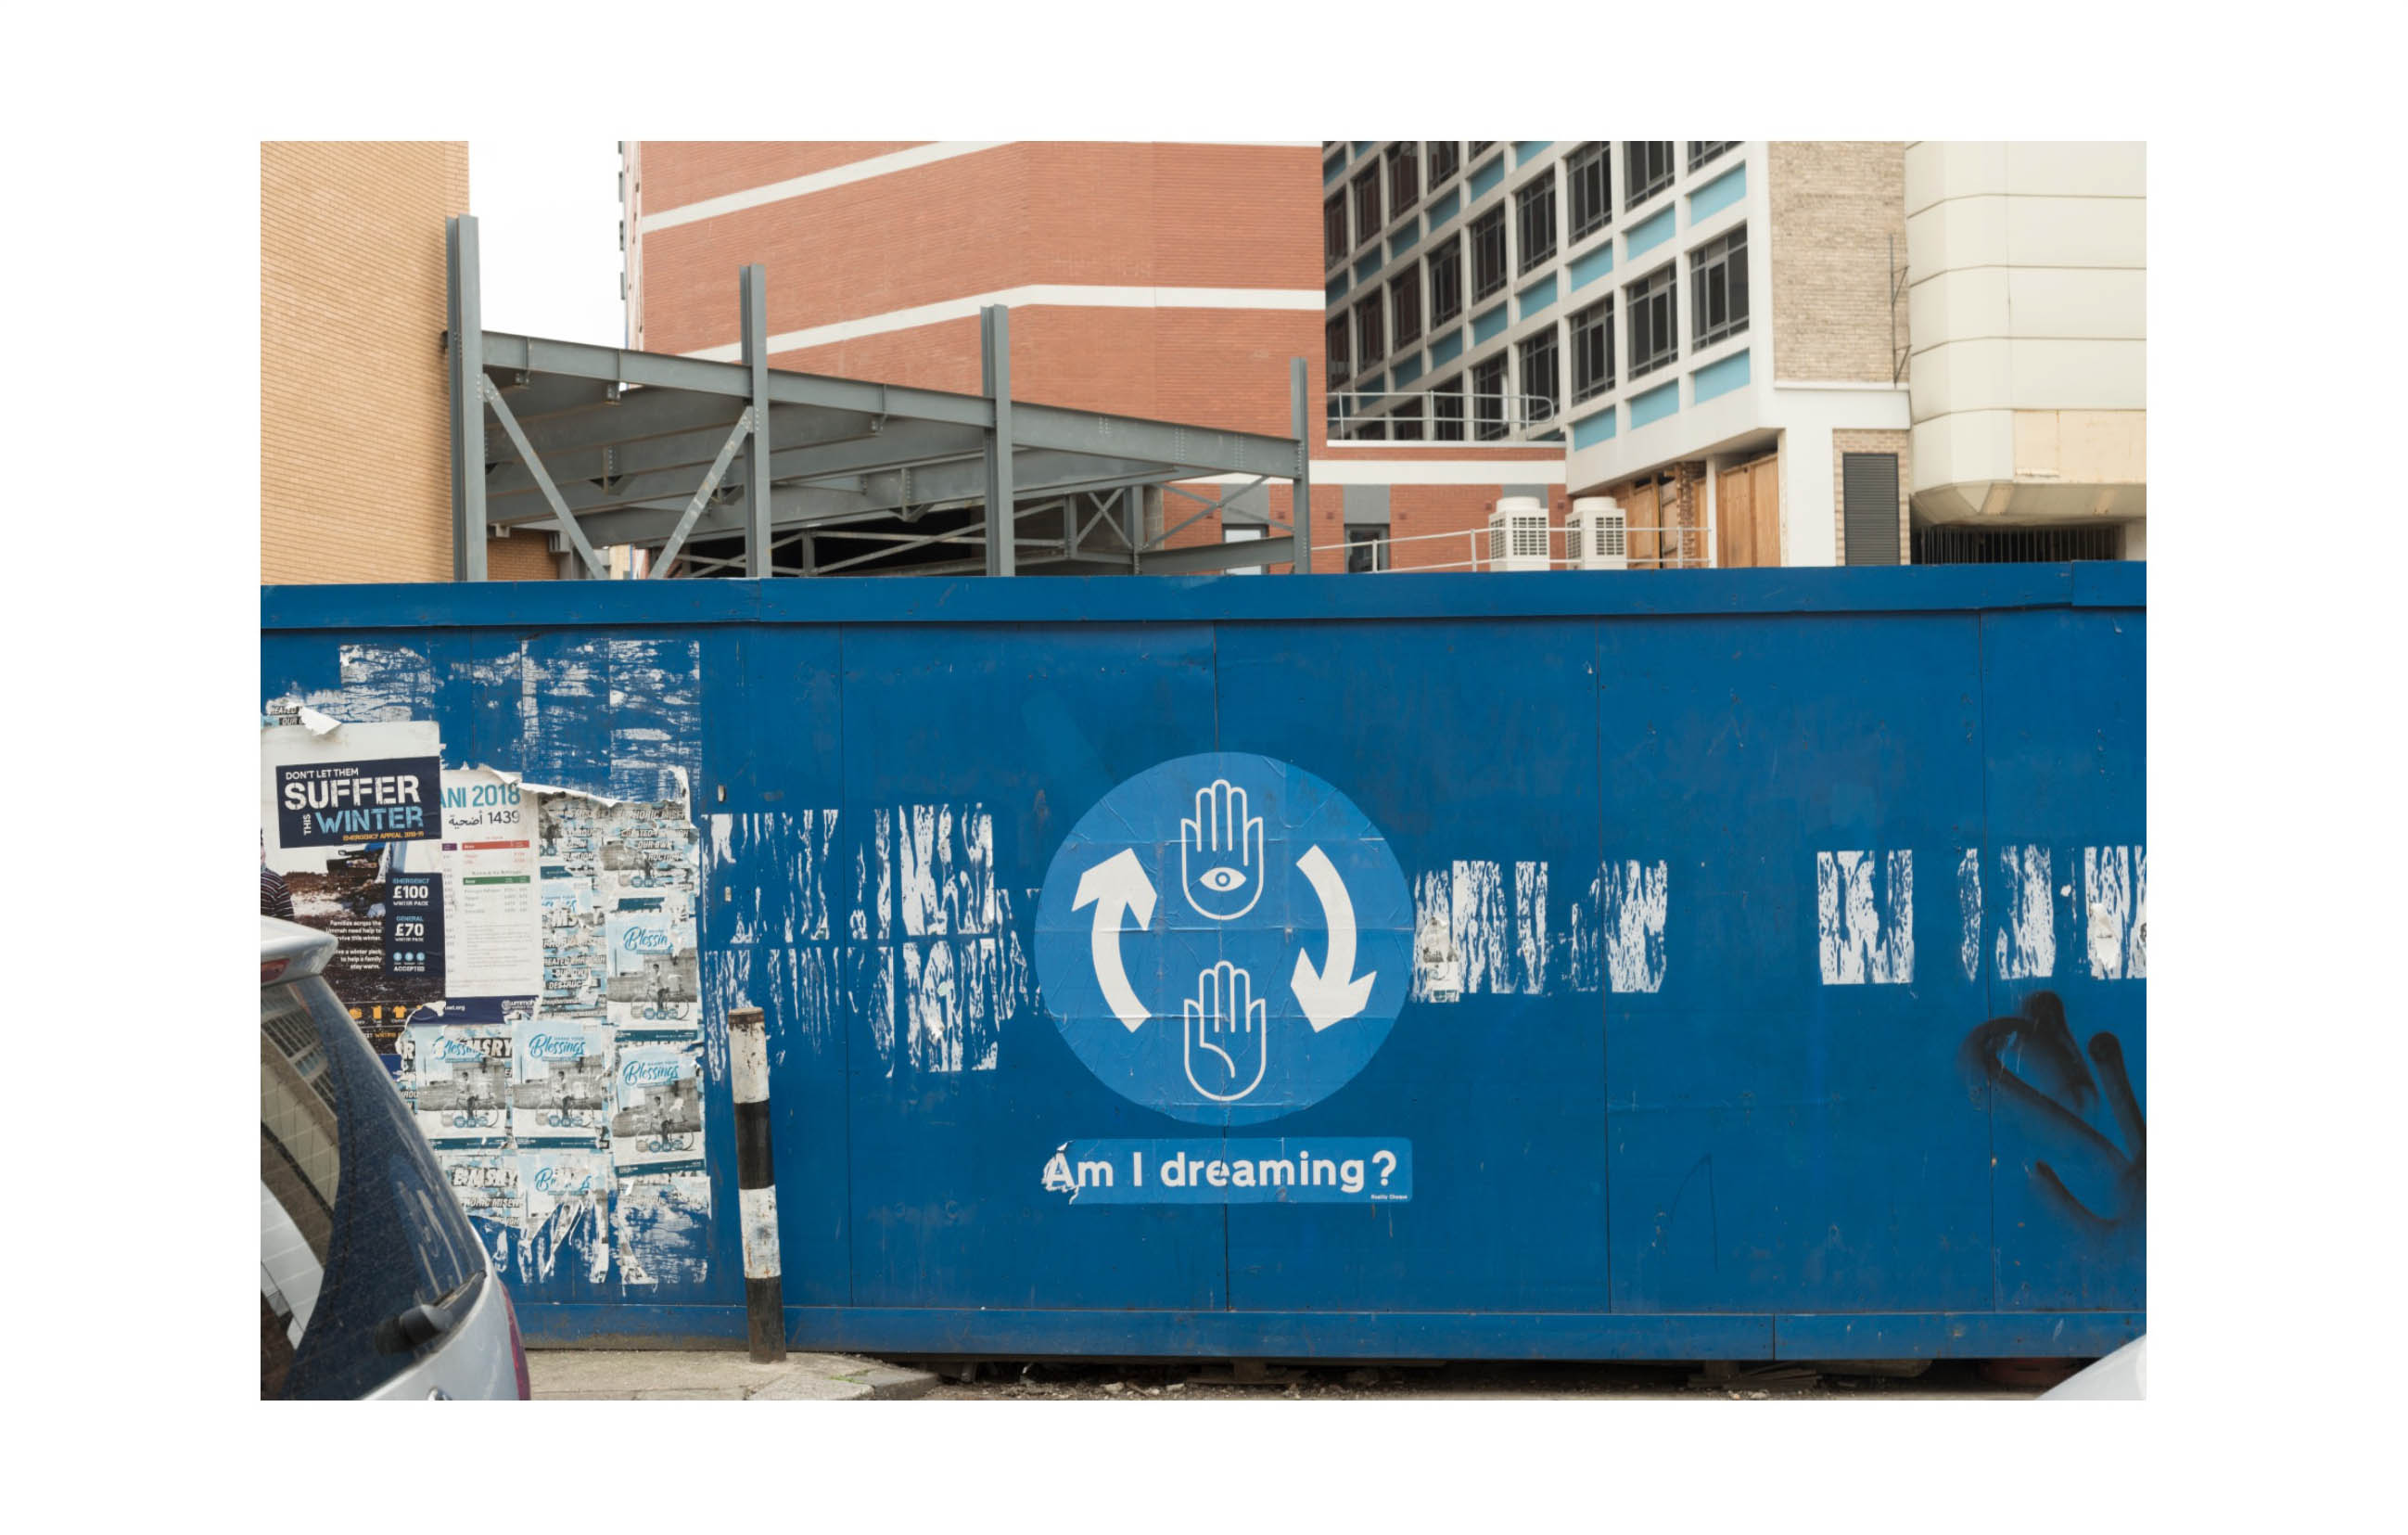 a blue hoarding with a circular poster on which there is a hand with an eye and a hand without one joined by two circular arrows, below this are the words - am I dreaming?